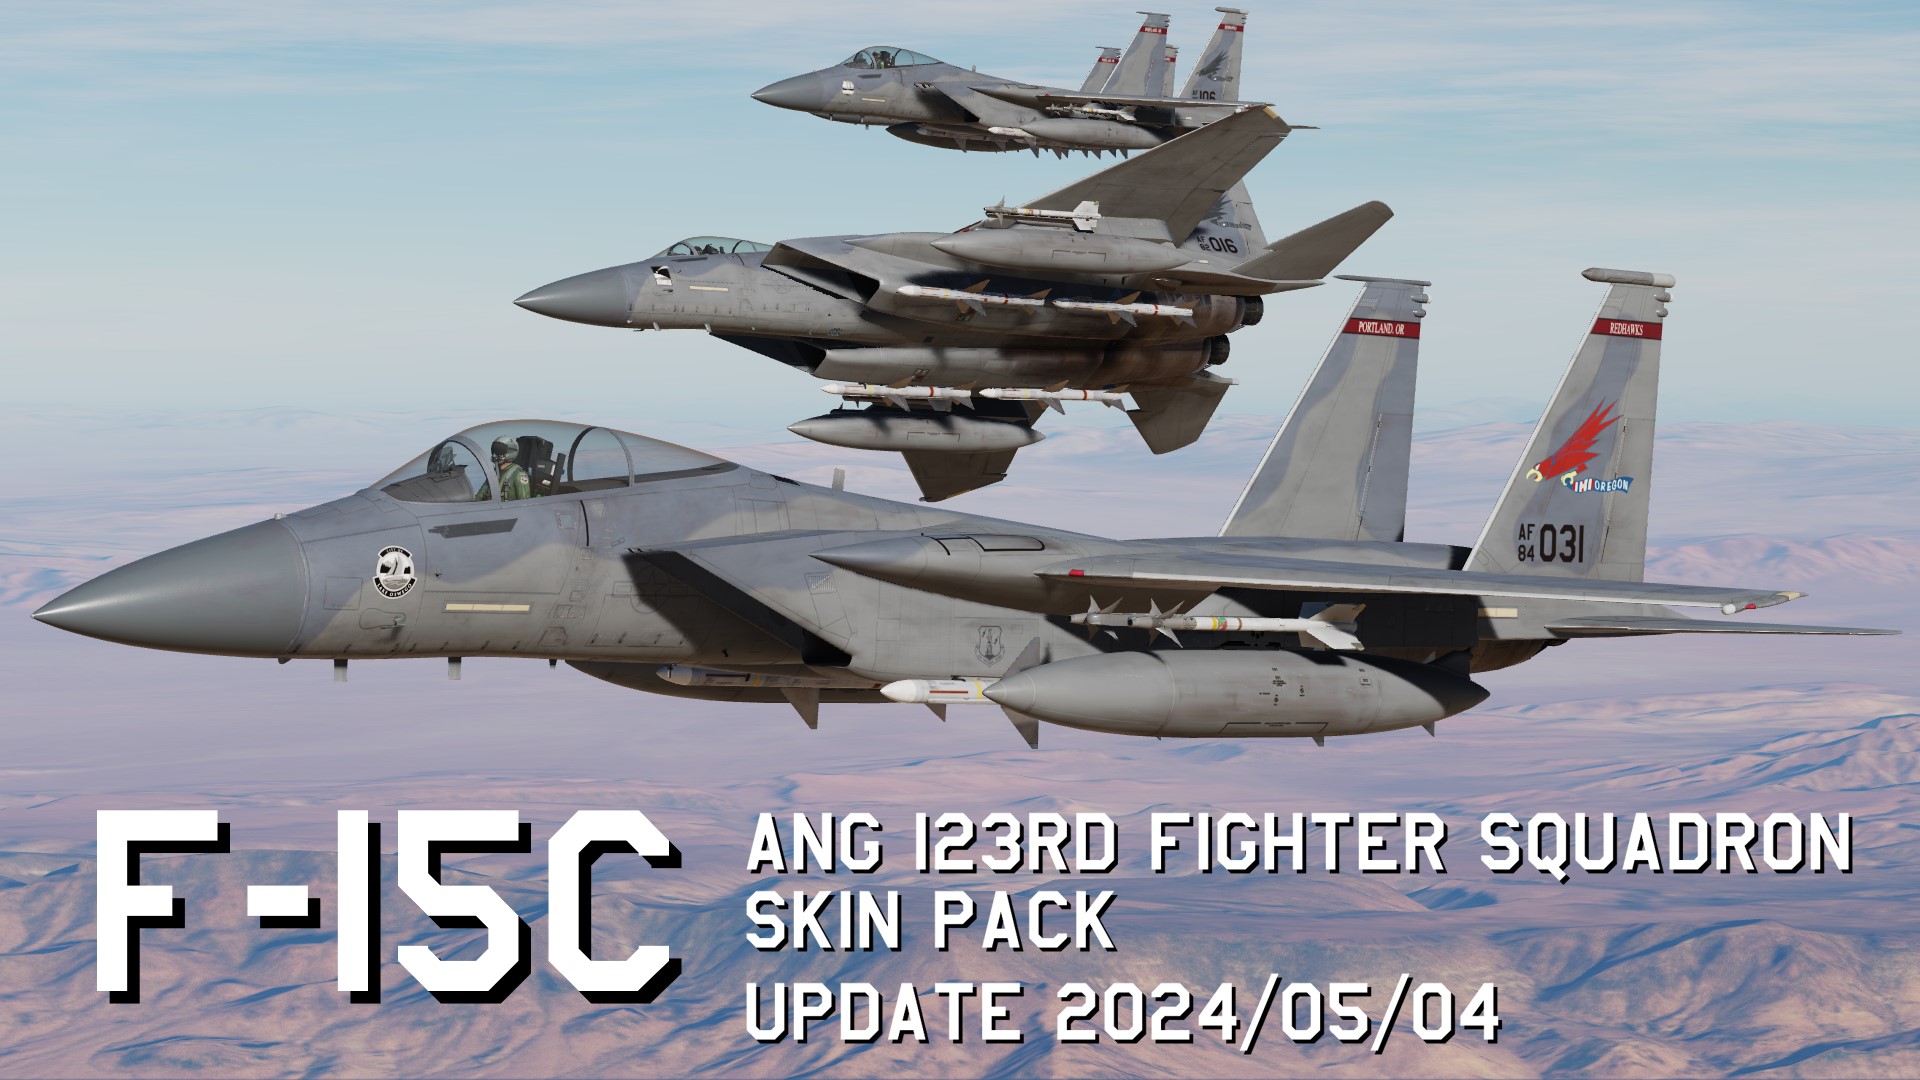 F-15C ANG 123rd Fighter Squadron 4K Skin Pack update 2024/05/04